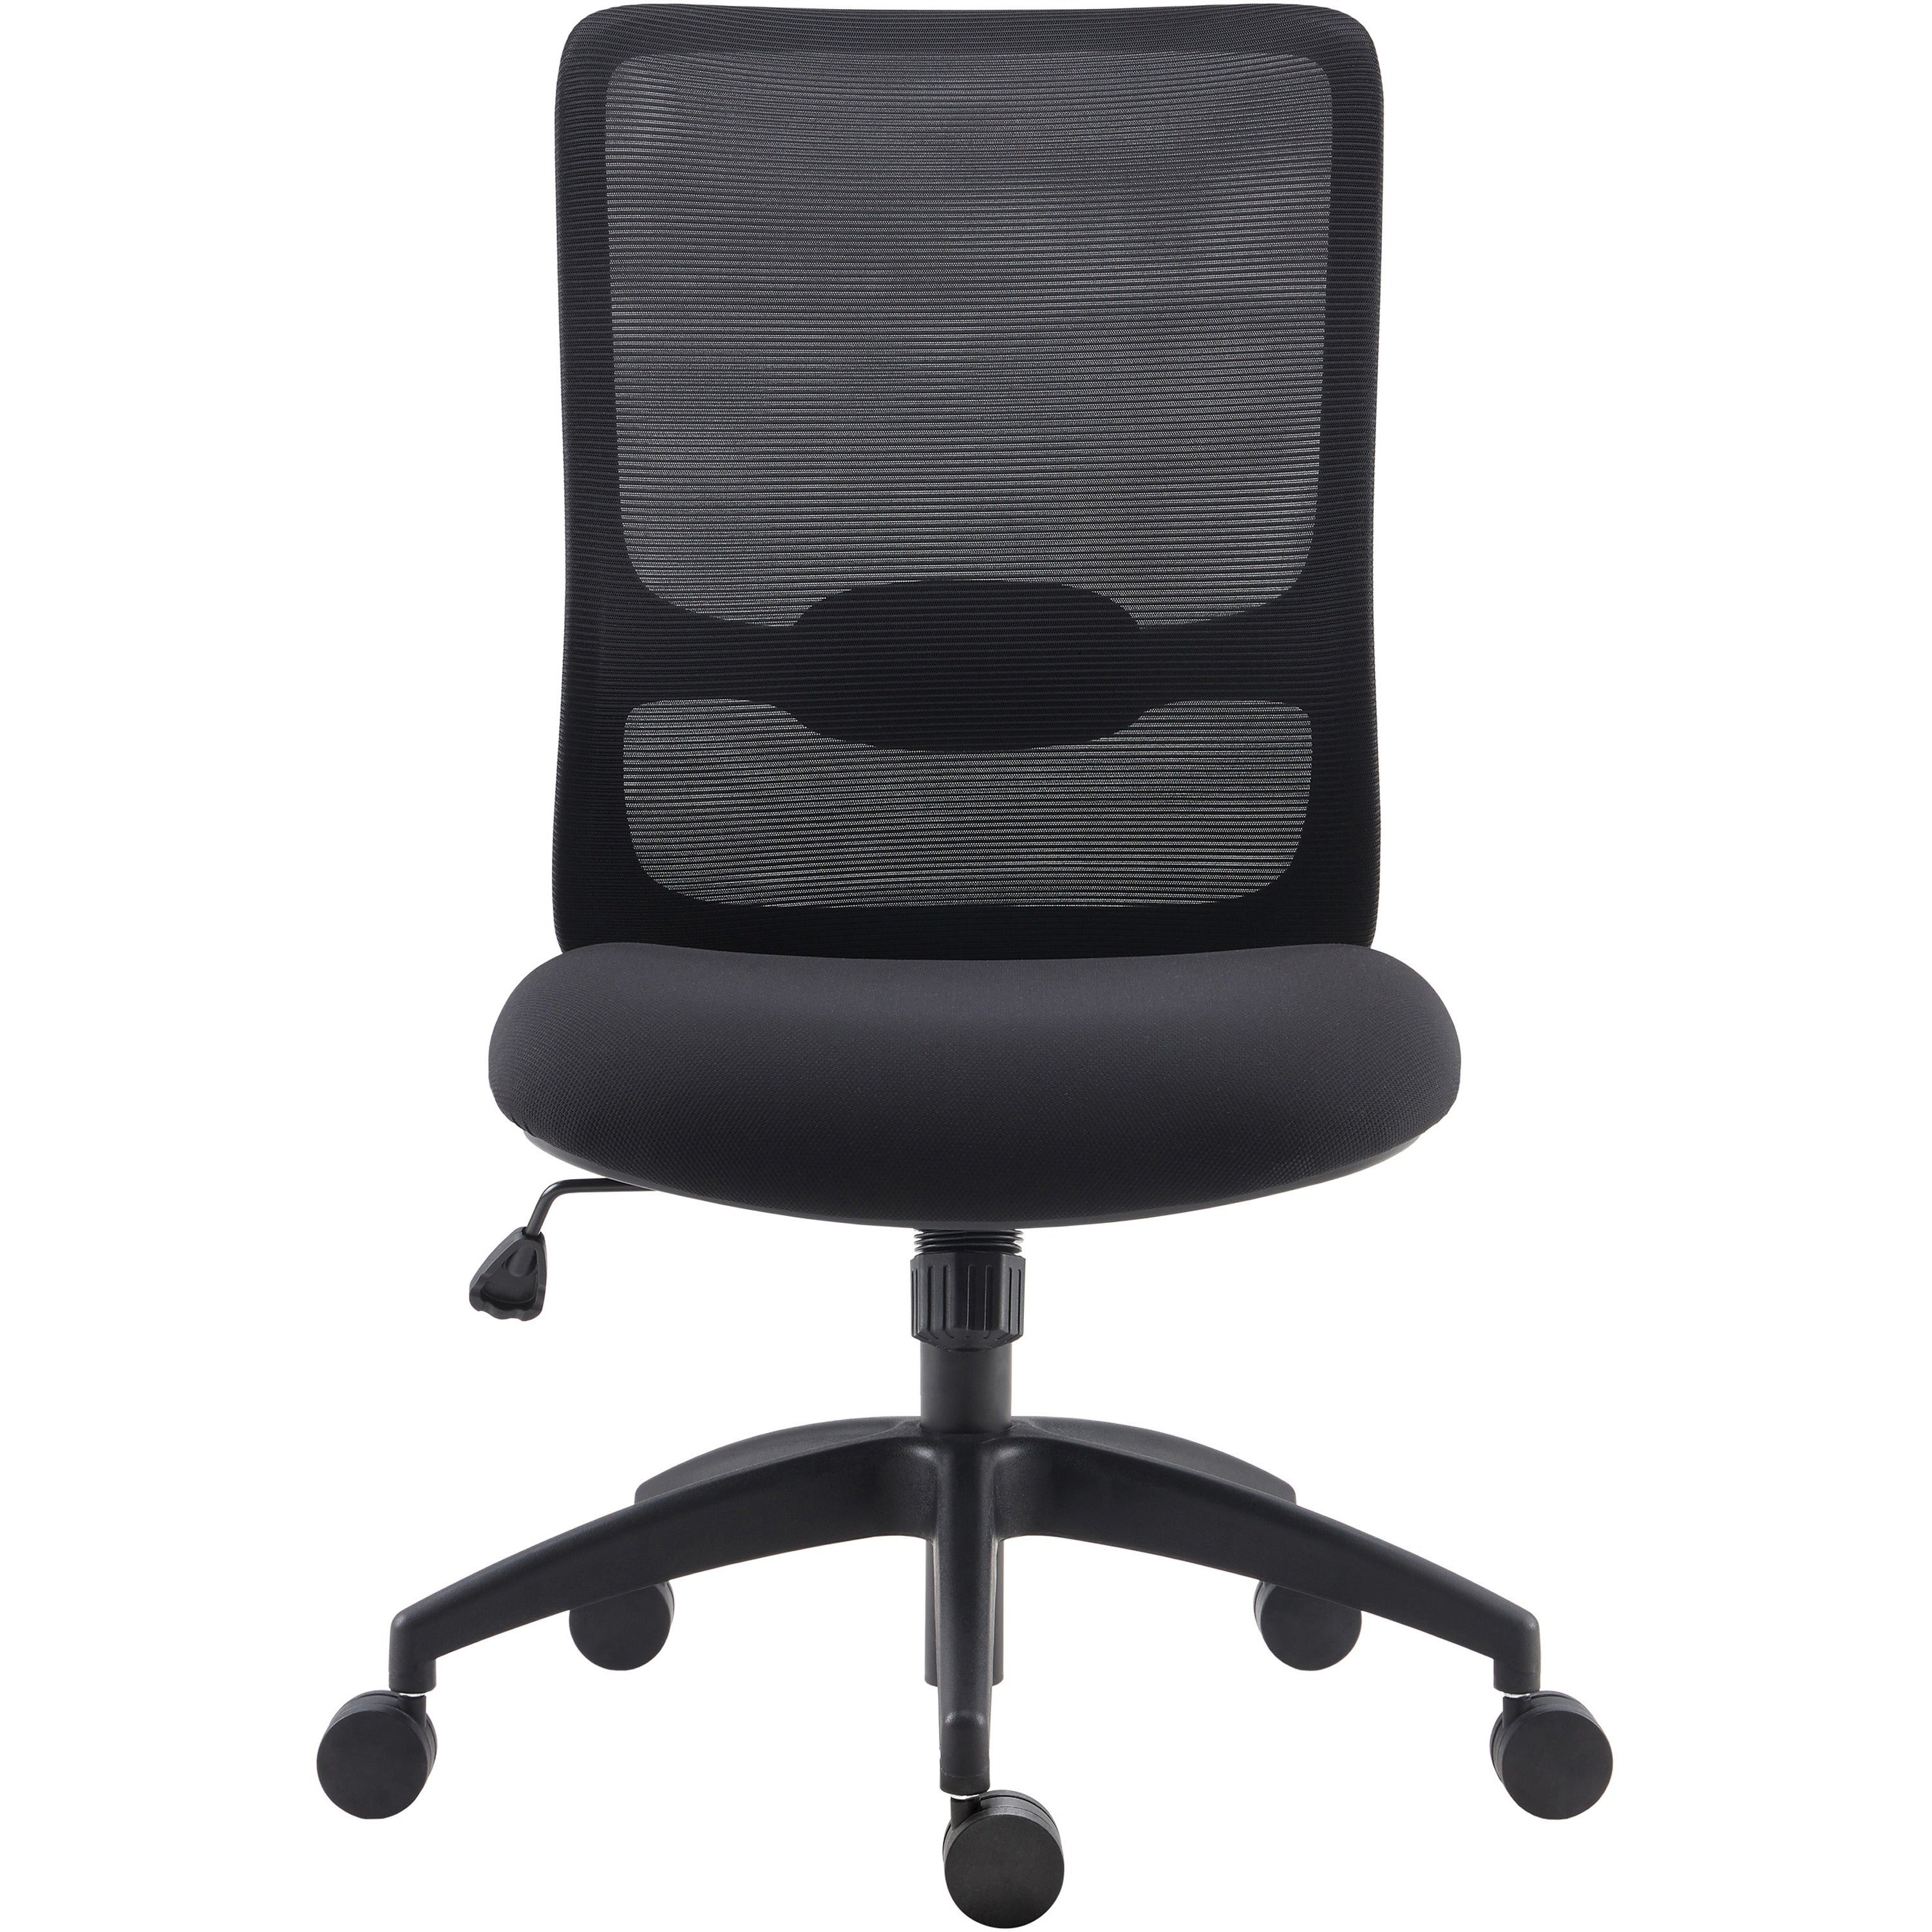 lys-soho-collection-staff-chair-fabric-seat-black-1-each_lysch200mnbk - 3